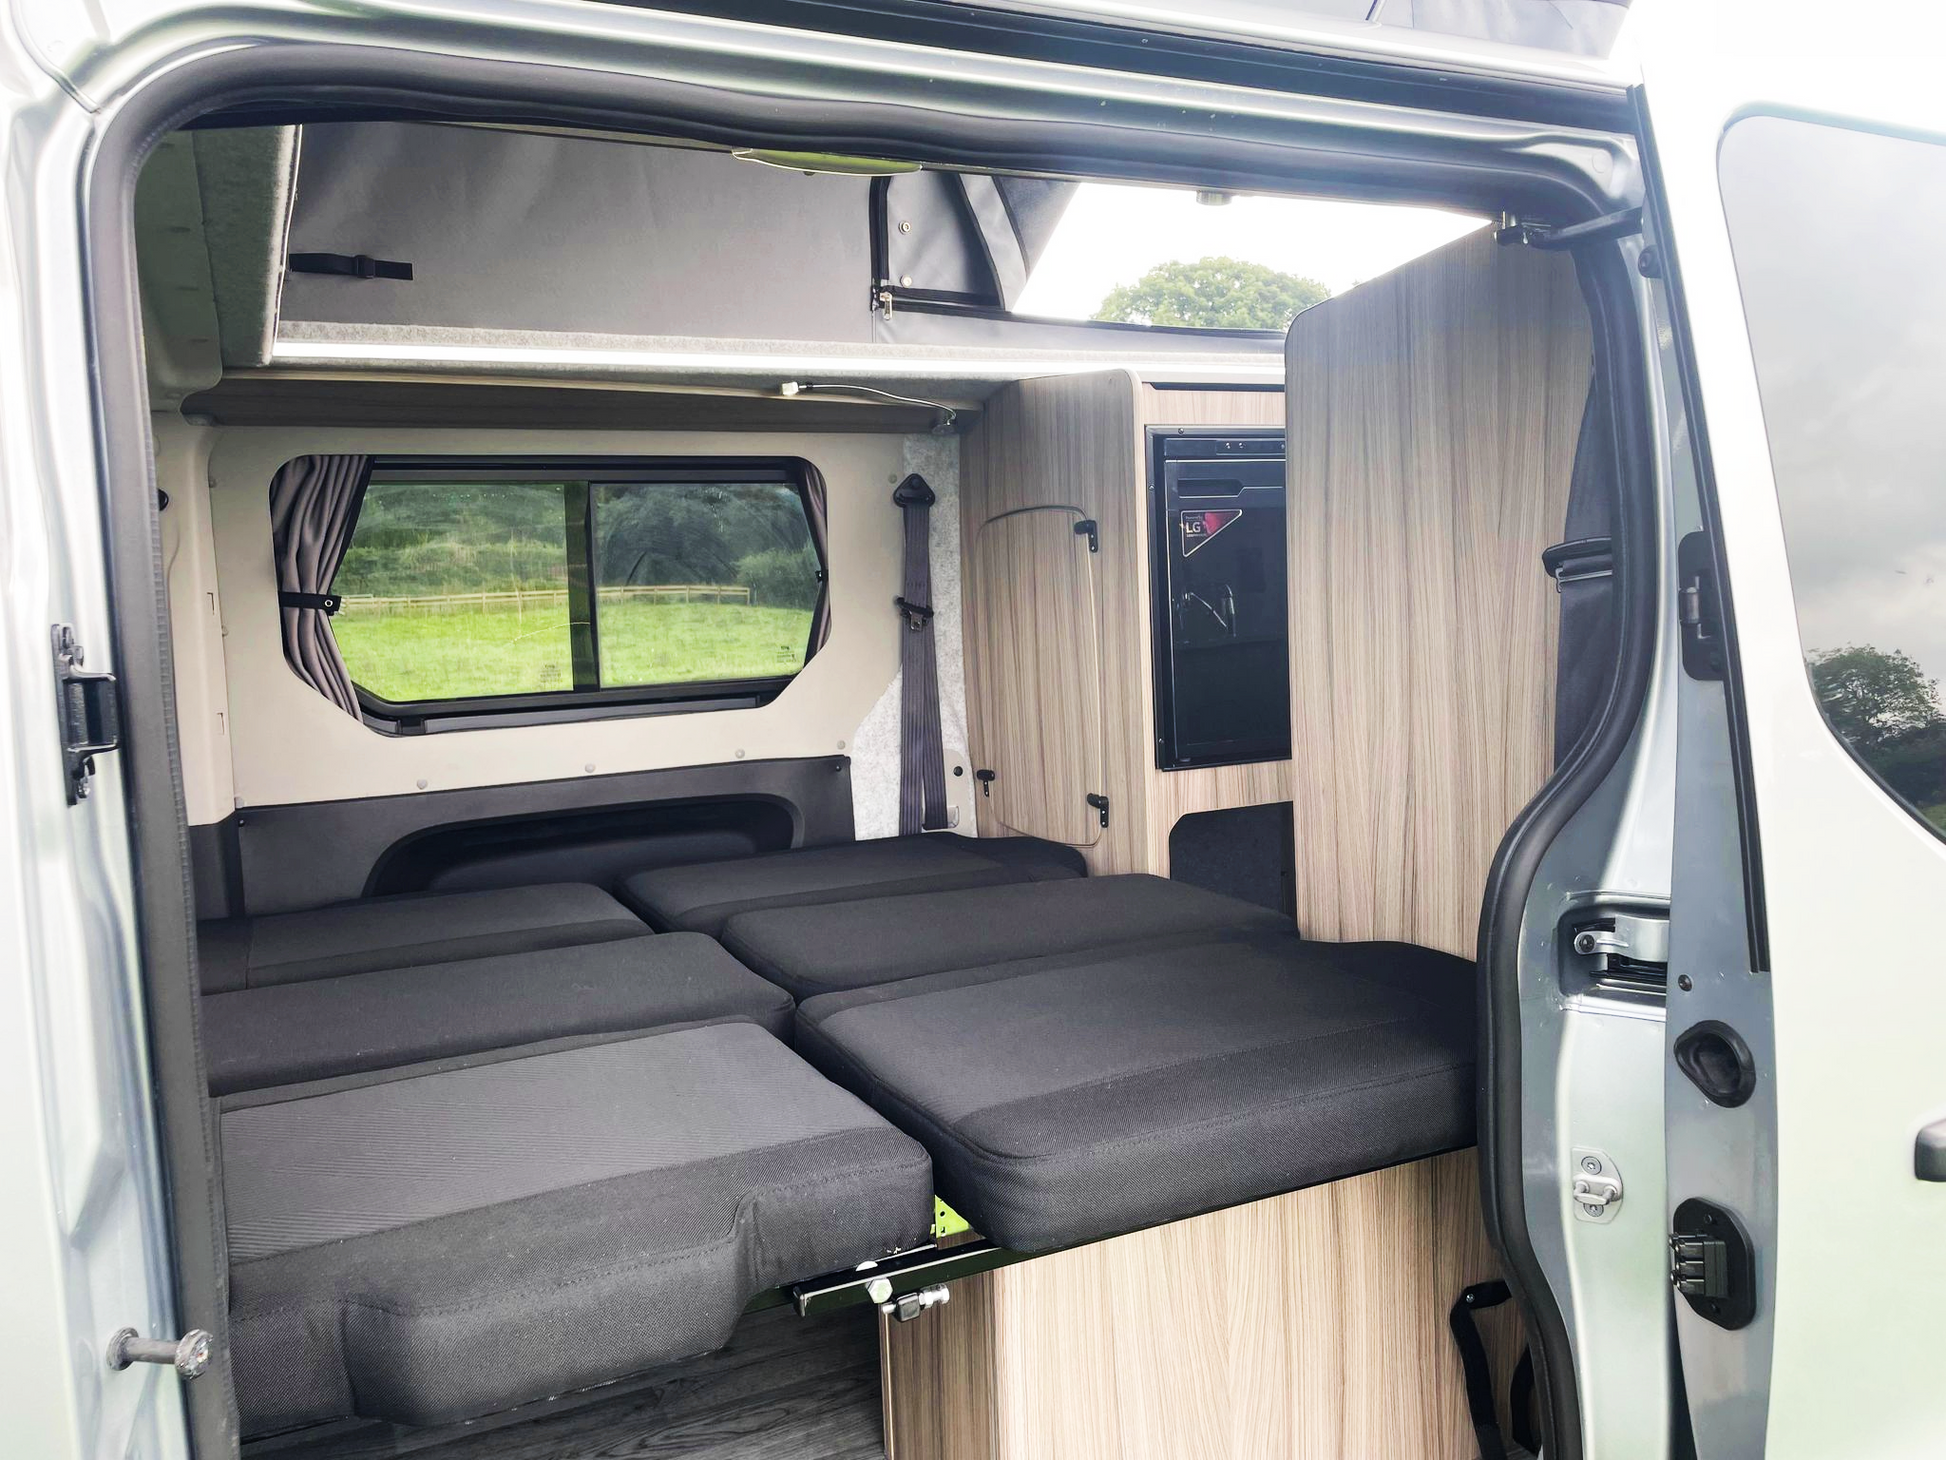 The Witley Renault Trafic Sport with an automatic option by CCCAMPERS fully-featured mini micro compact campervan motorhome - cccampers.myshopify.com